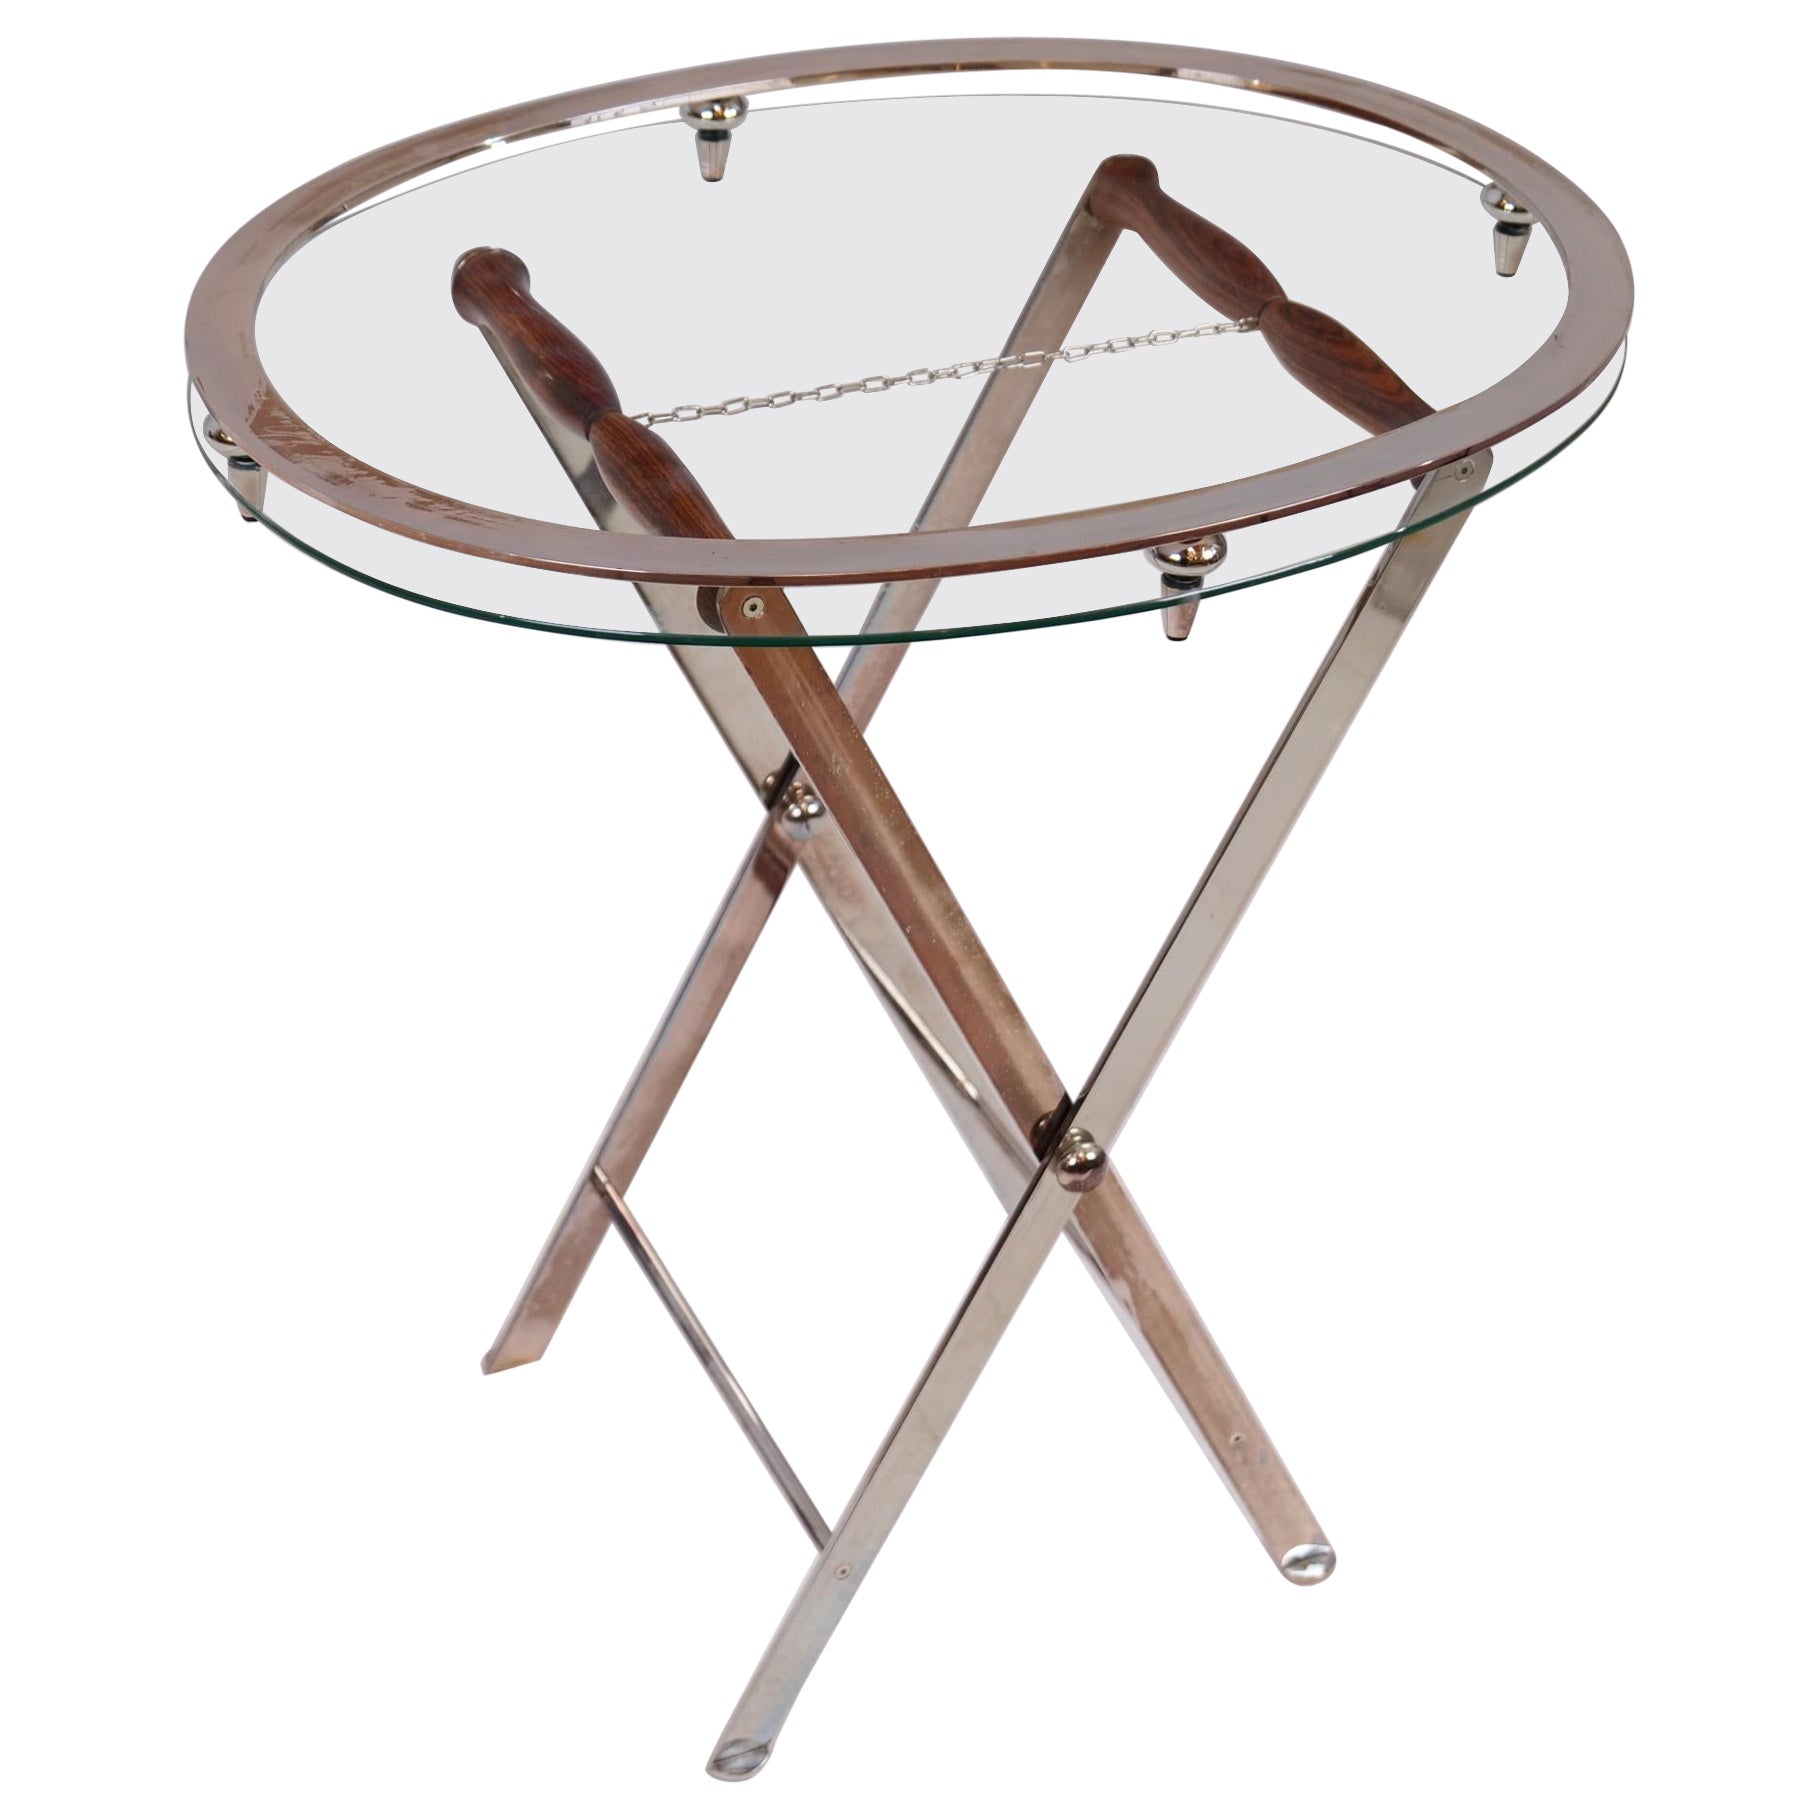 High quality silver plated vintage serving table with removable top